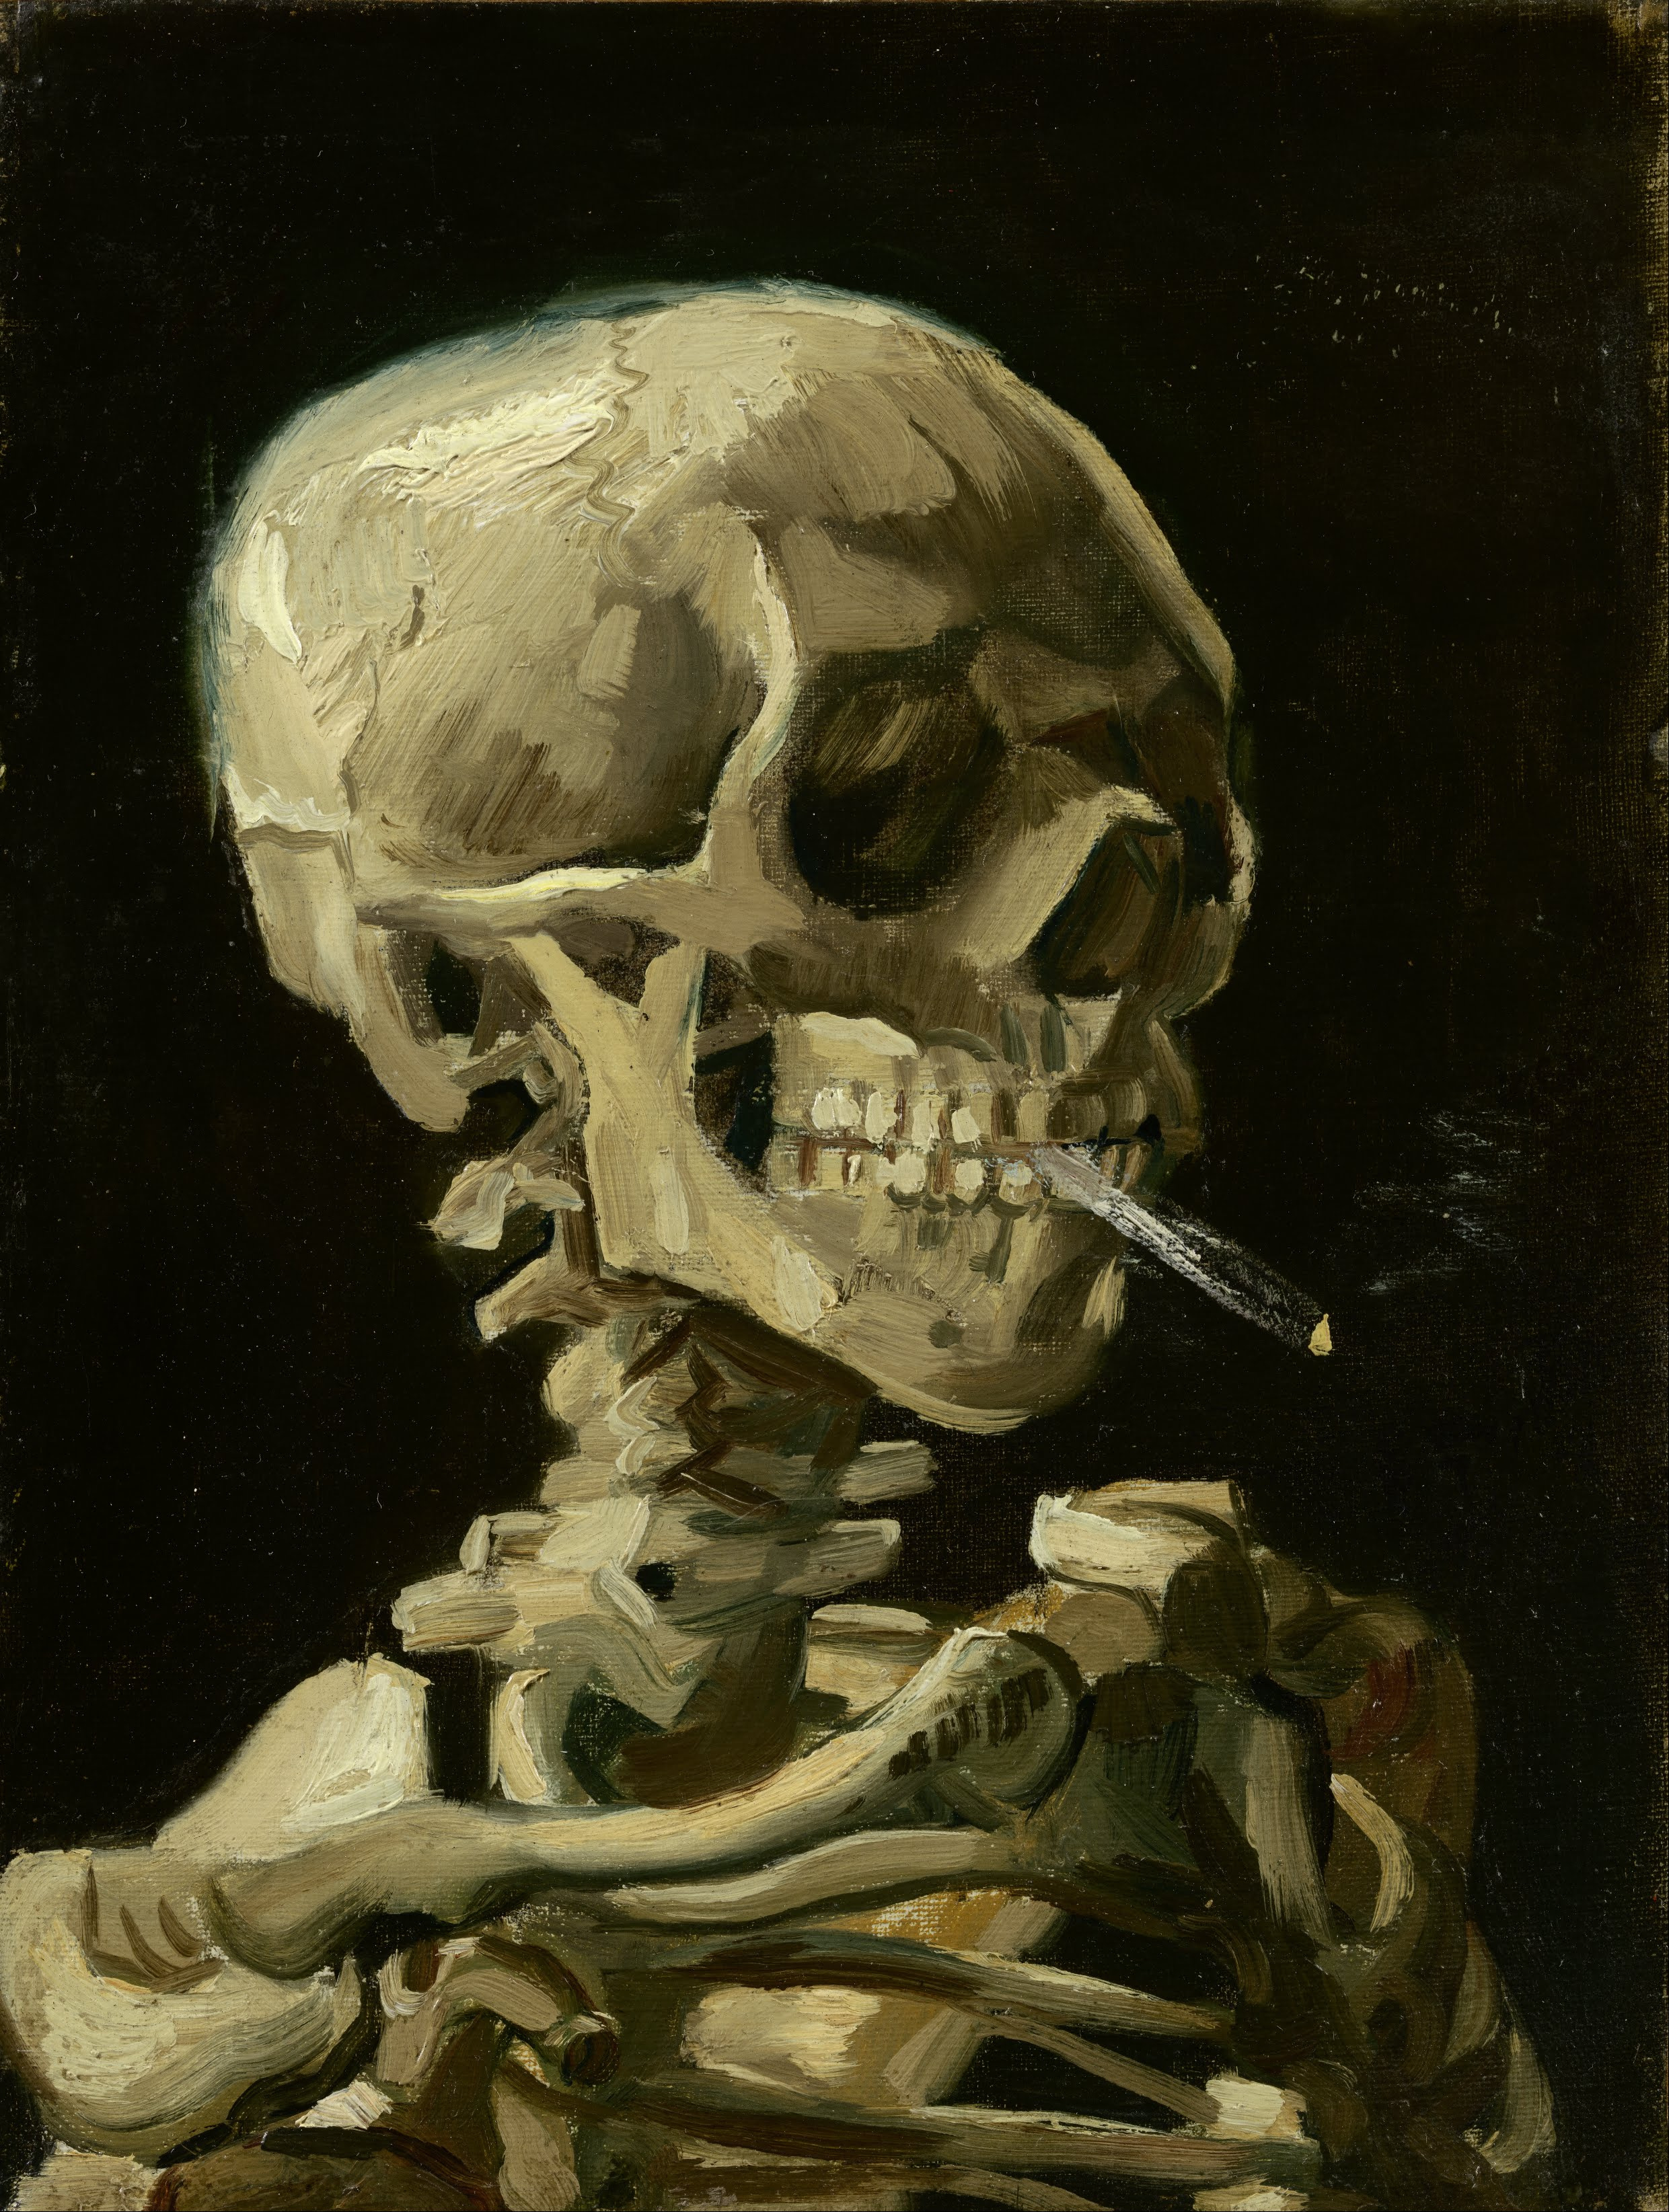 Skull of a Skeleton with Burning Cigarette by Van Gogh